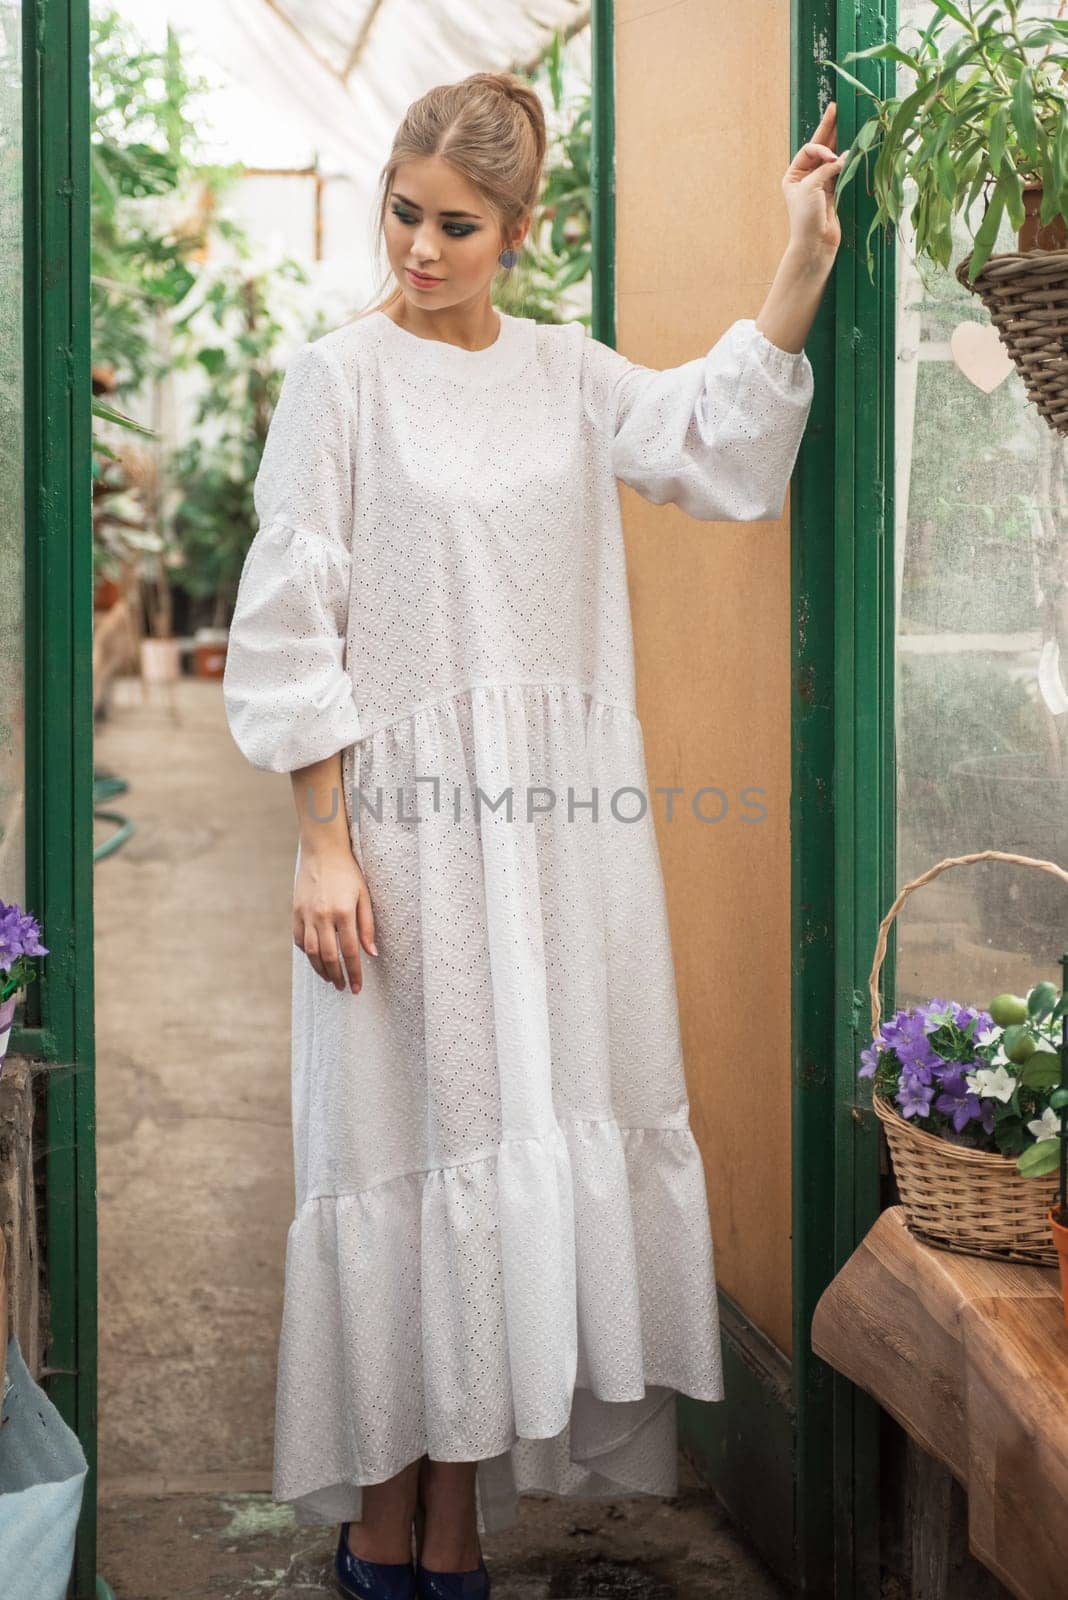 Young woman in white dress at a glass greenhouse